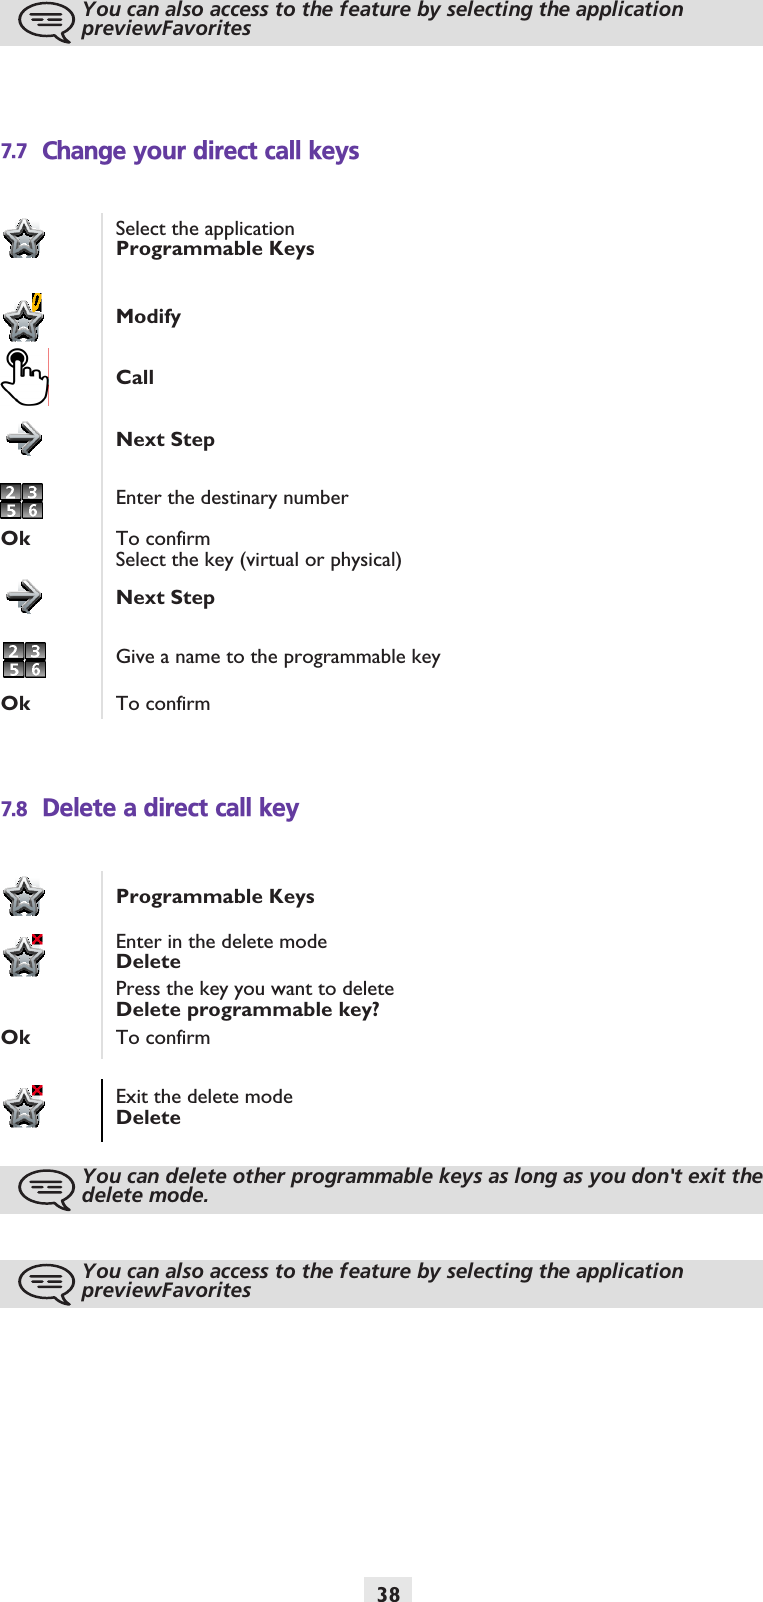 387.7 Change your direct call keys7.8 Delete a direct call keyYou can also access to the feature by selecting the application previewFavoritesSelect the applicationProgrammable KeysModifyCallNext StepEnter the destinary numberOk To confirmSelect the key (virtual or physical)Next StepGive a name to the programmable keyOk To confirmProgrammable KeysEnter in the delete modeDeletePress the key you want to deleteDelete programmable key?Ok To confirmExit the delete modeDeleteYou can delete other programmable keys as long as you don&apos;t exit the delete mode.You can also access to the feature by selecting the application previewFavorites